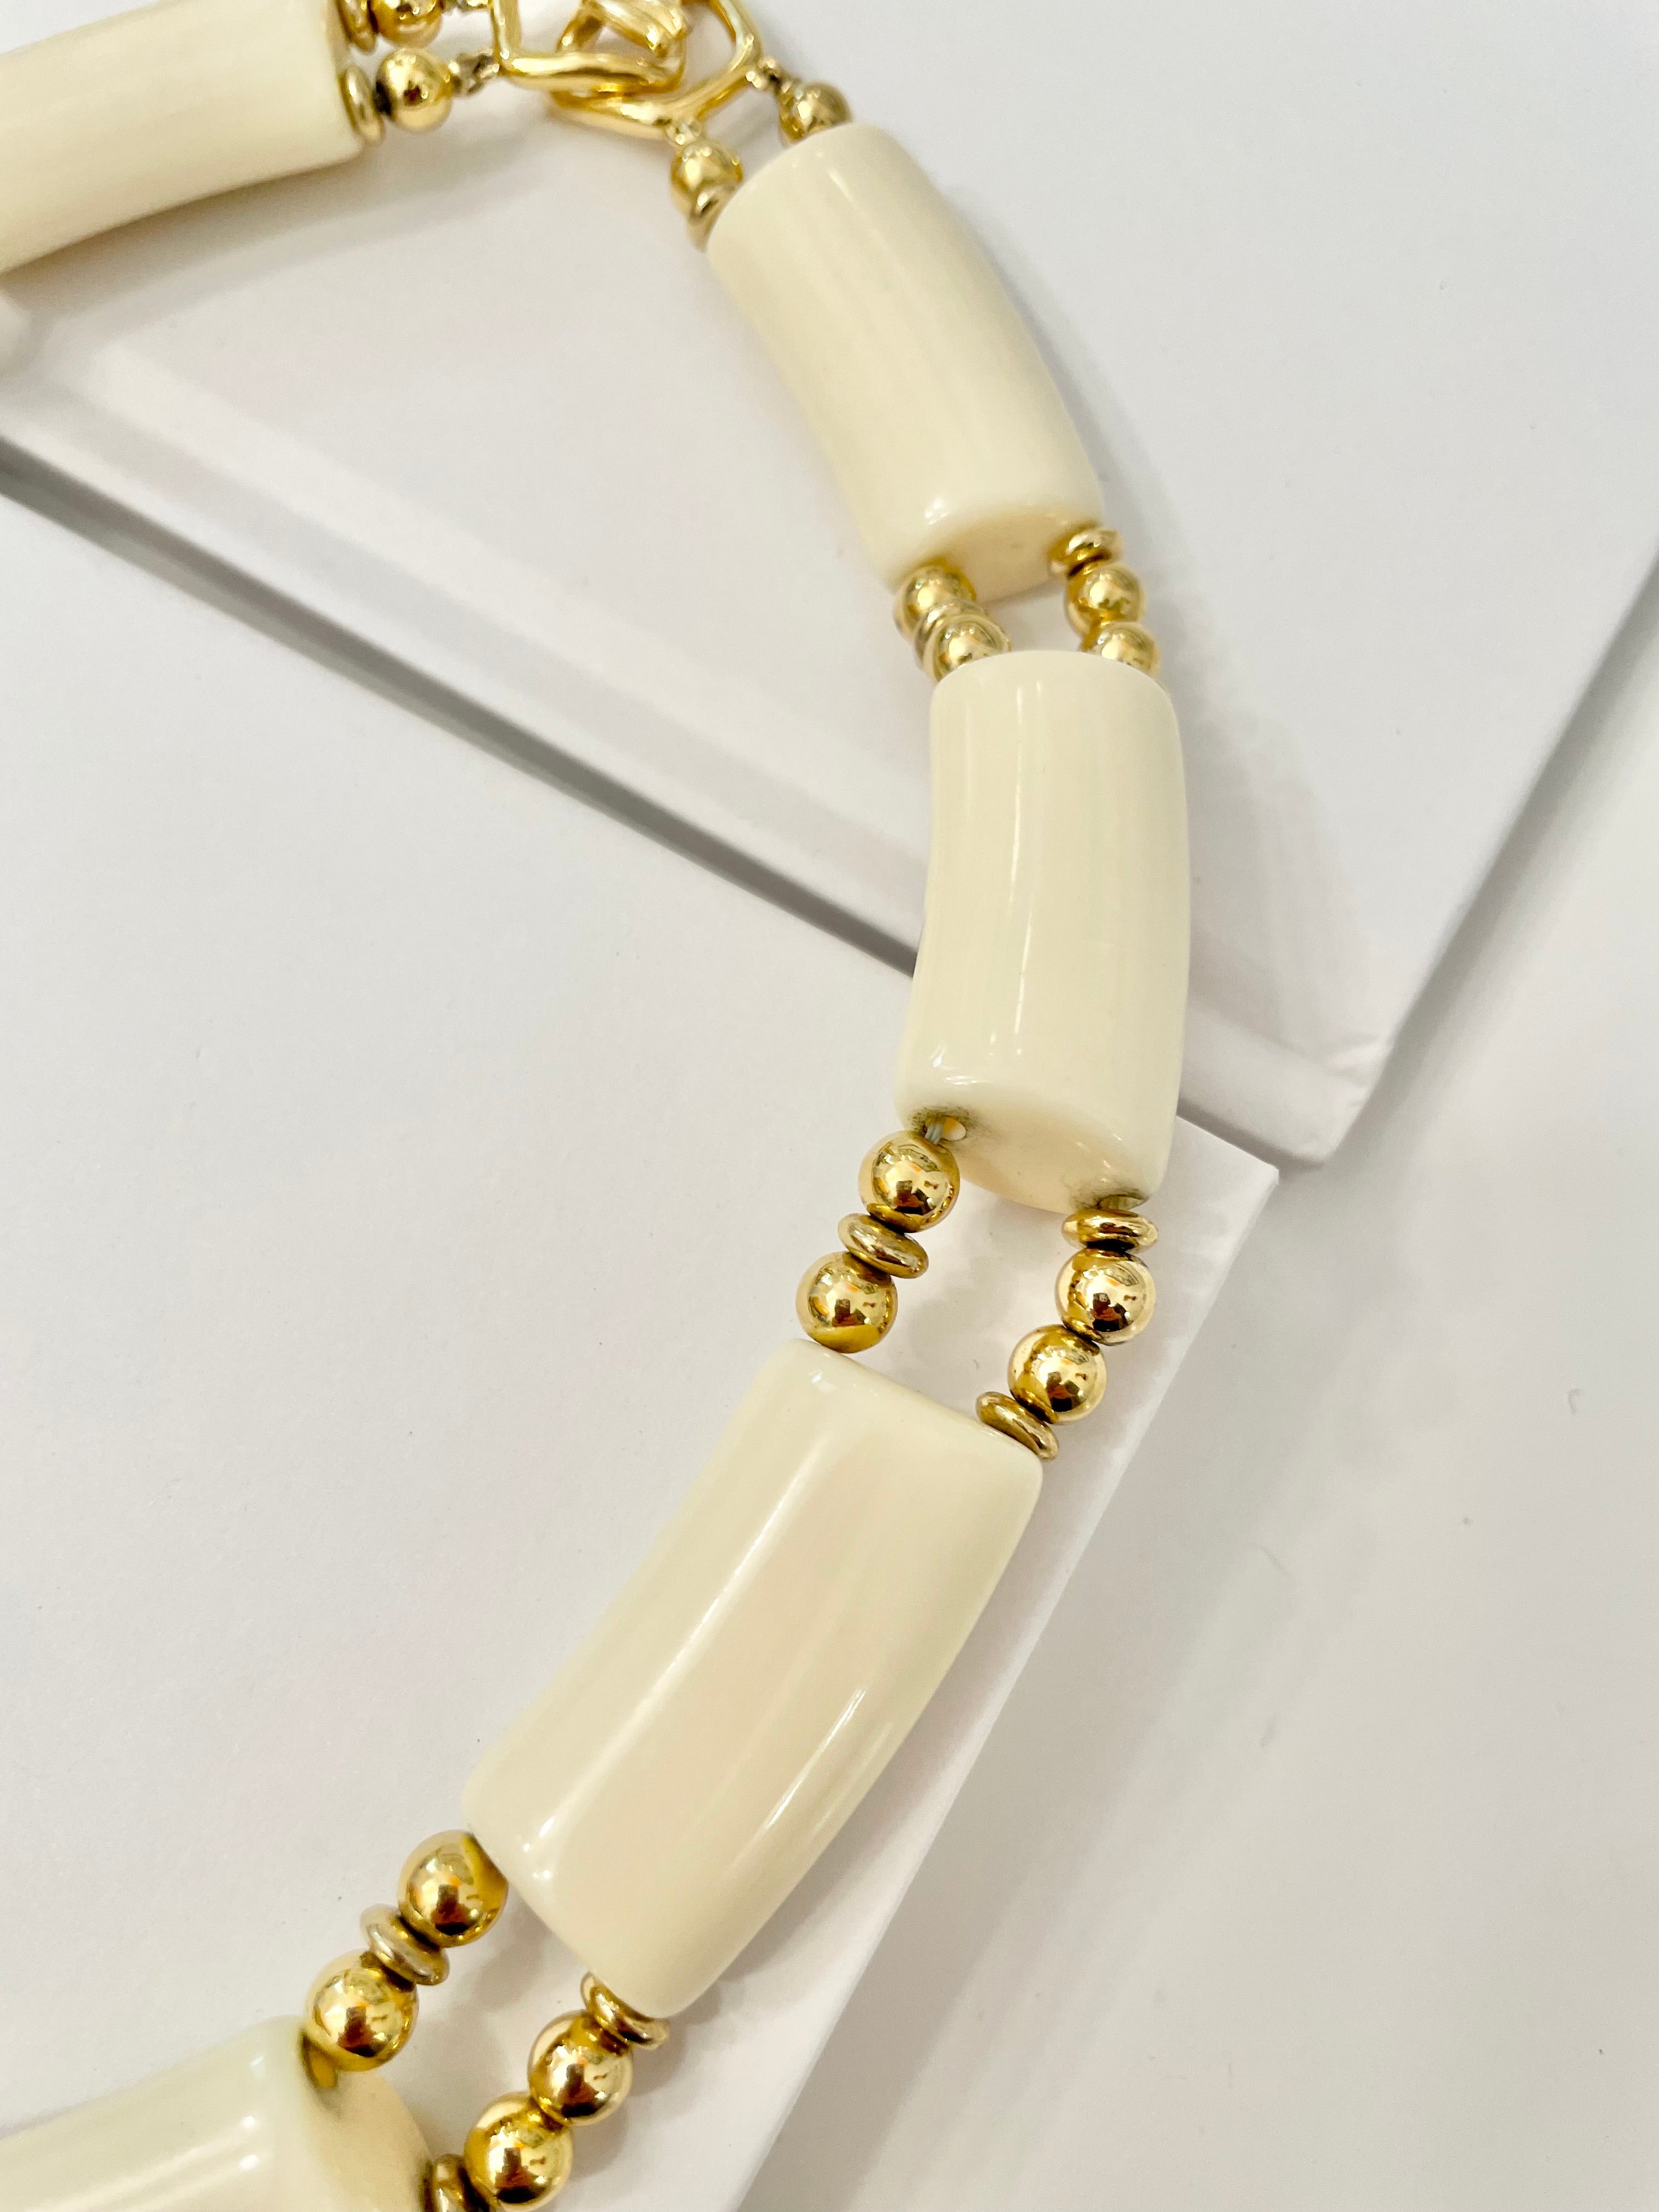 The Socialite loves a classic necklace... this ivory resin, and gold bead collar necklace is truly classy, and chic